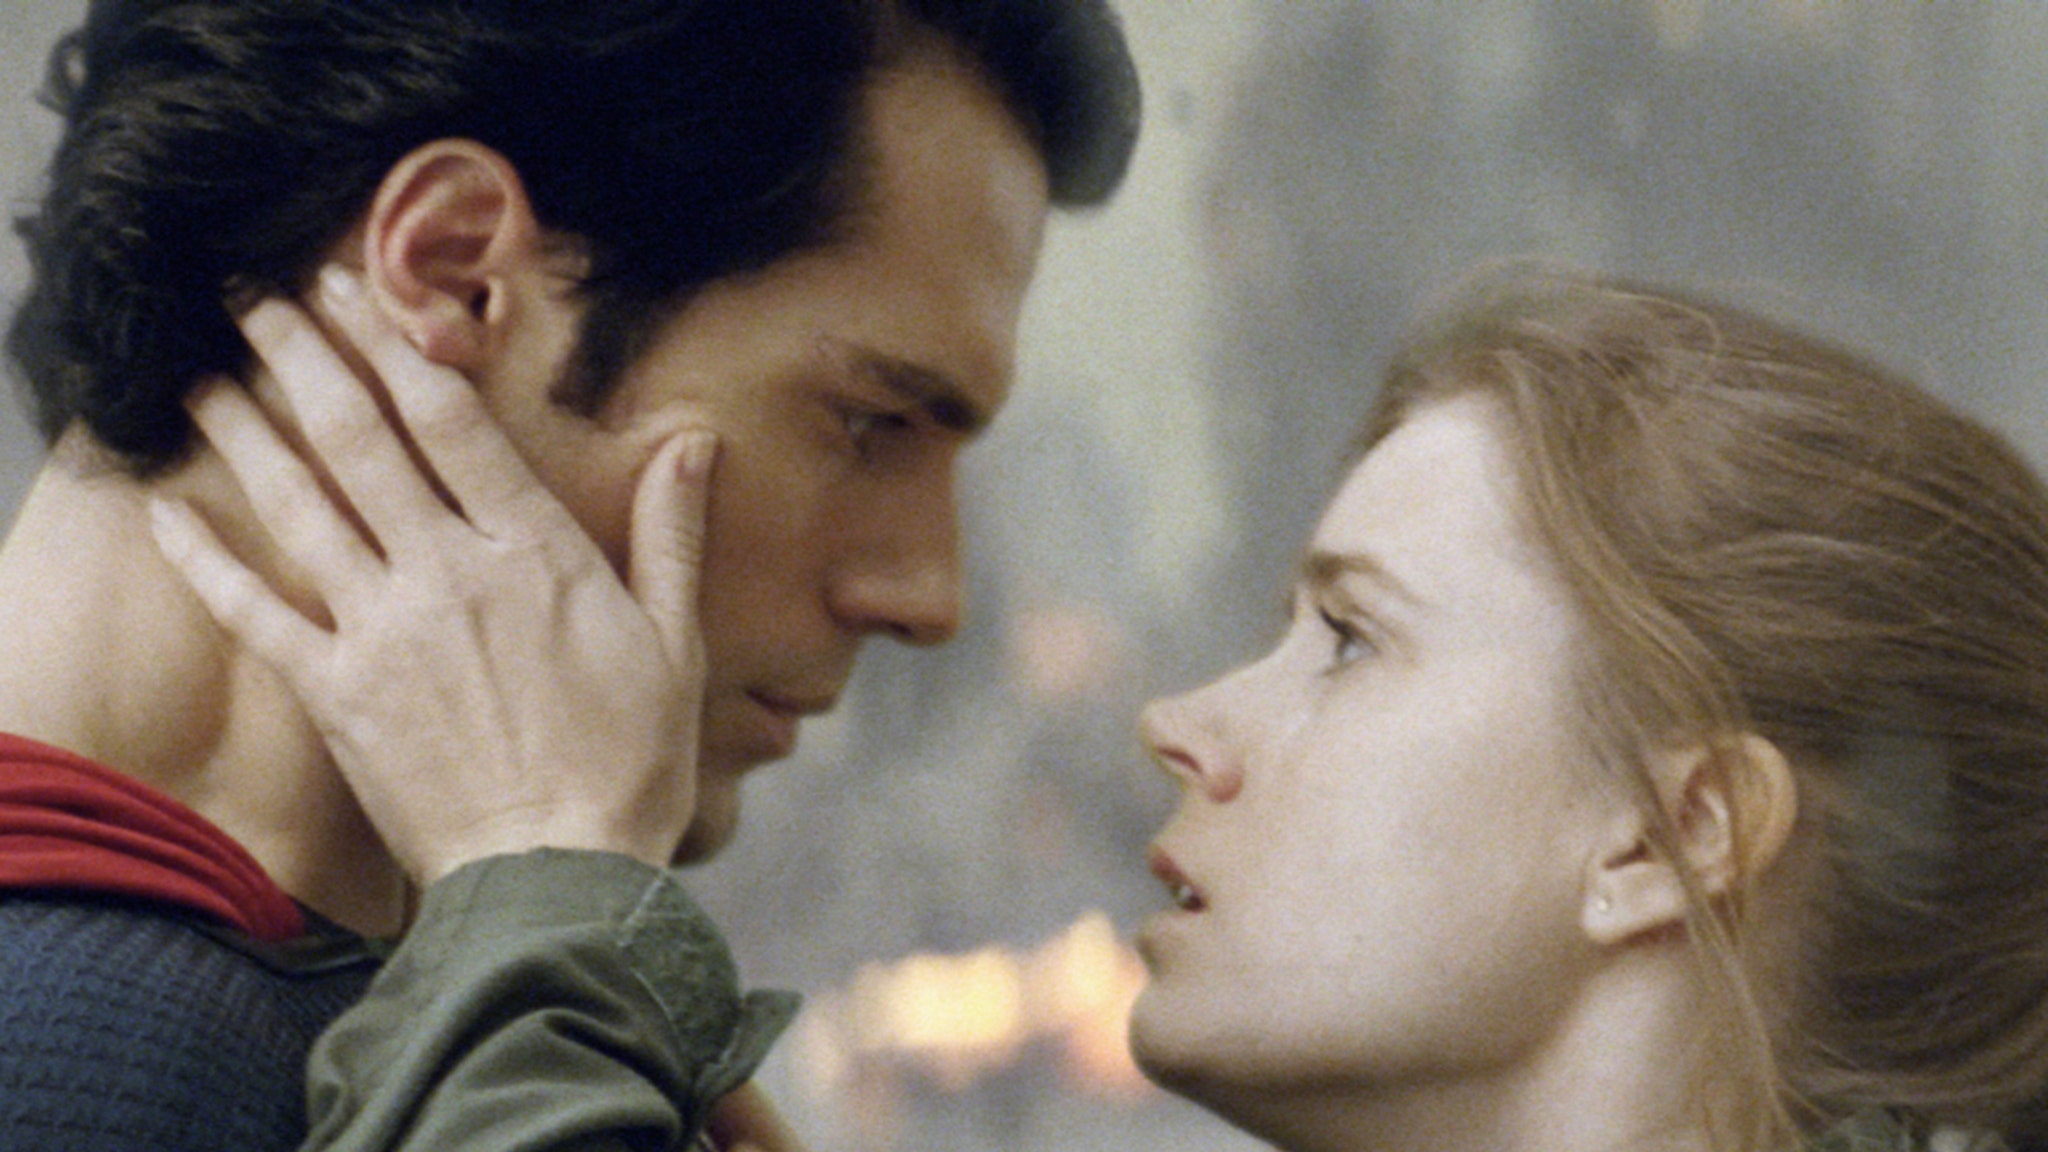 Amy Adams Confirms Man Of Steel 2 Is In The Works